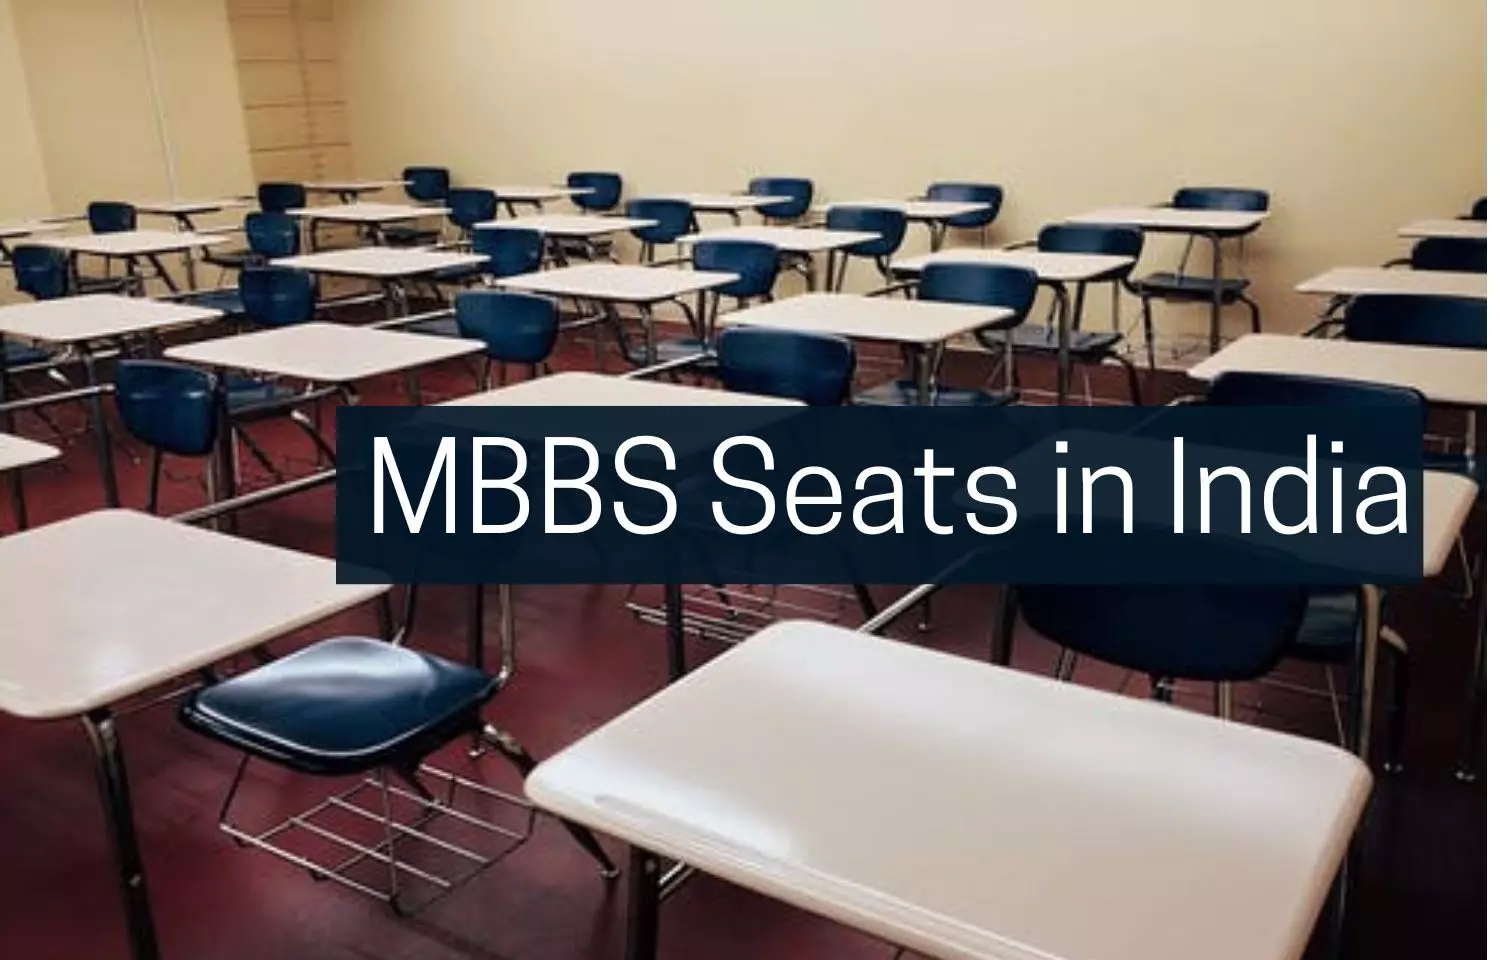 With 91,927 MBBS seats, 612 Medical Colleges operative in India: Health Minister gives breakup